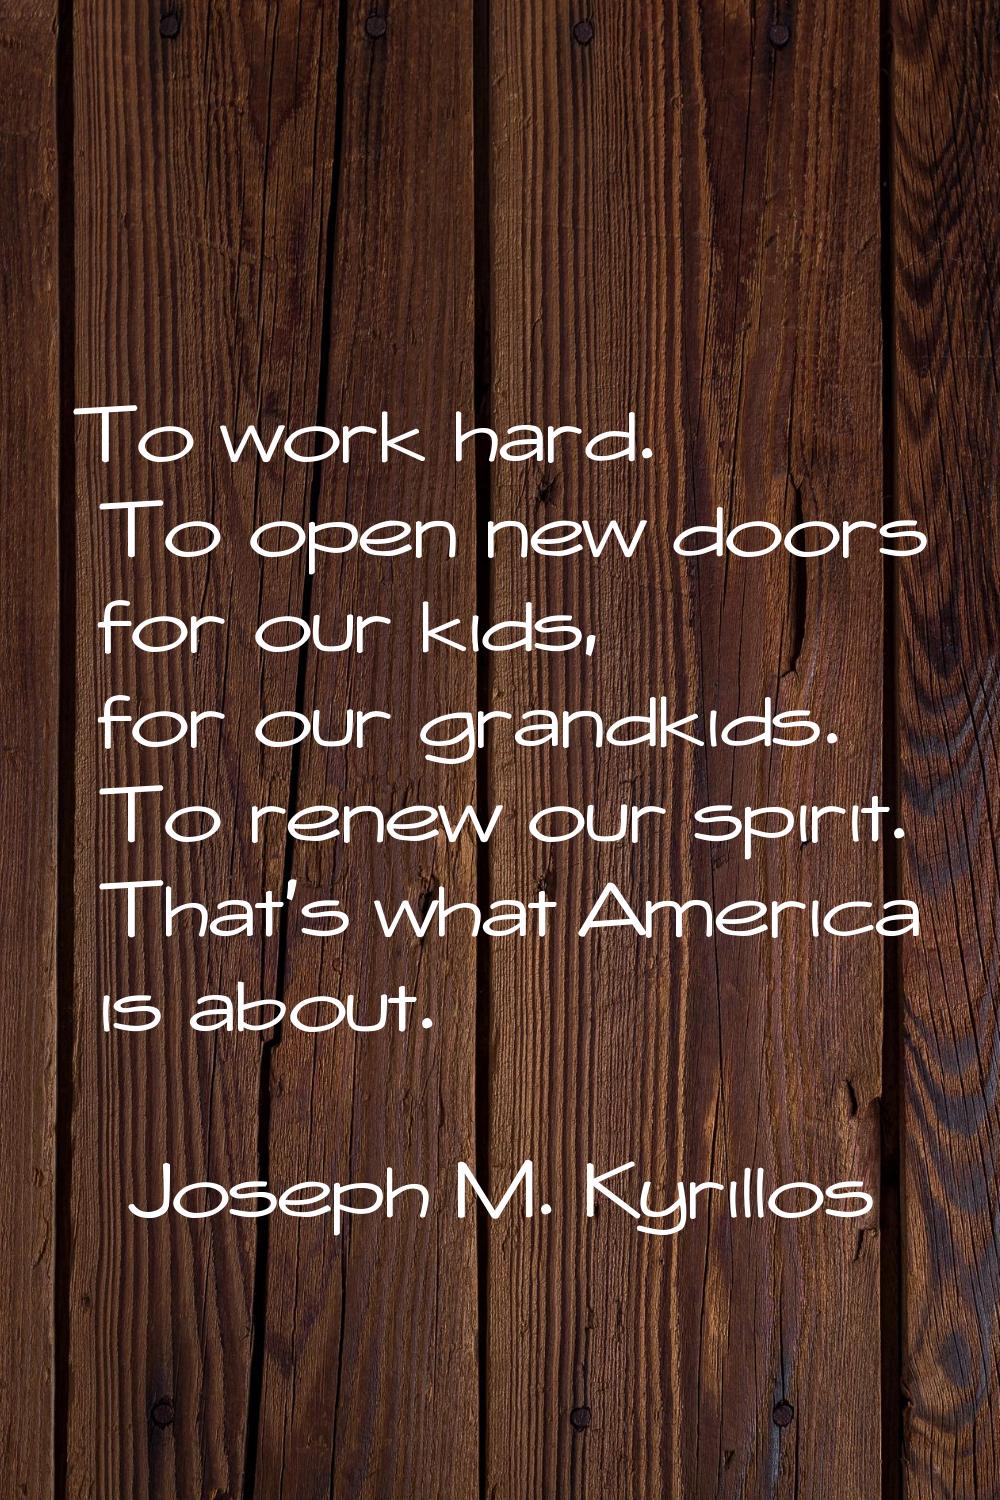 To work hard. To open new doors for our kids, for our grandkids. To renew our spirit. That's what A